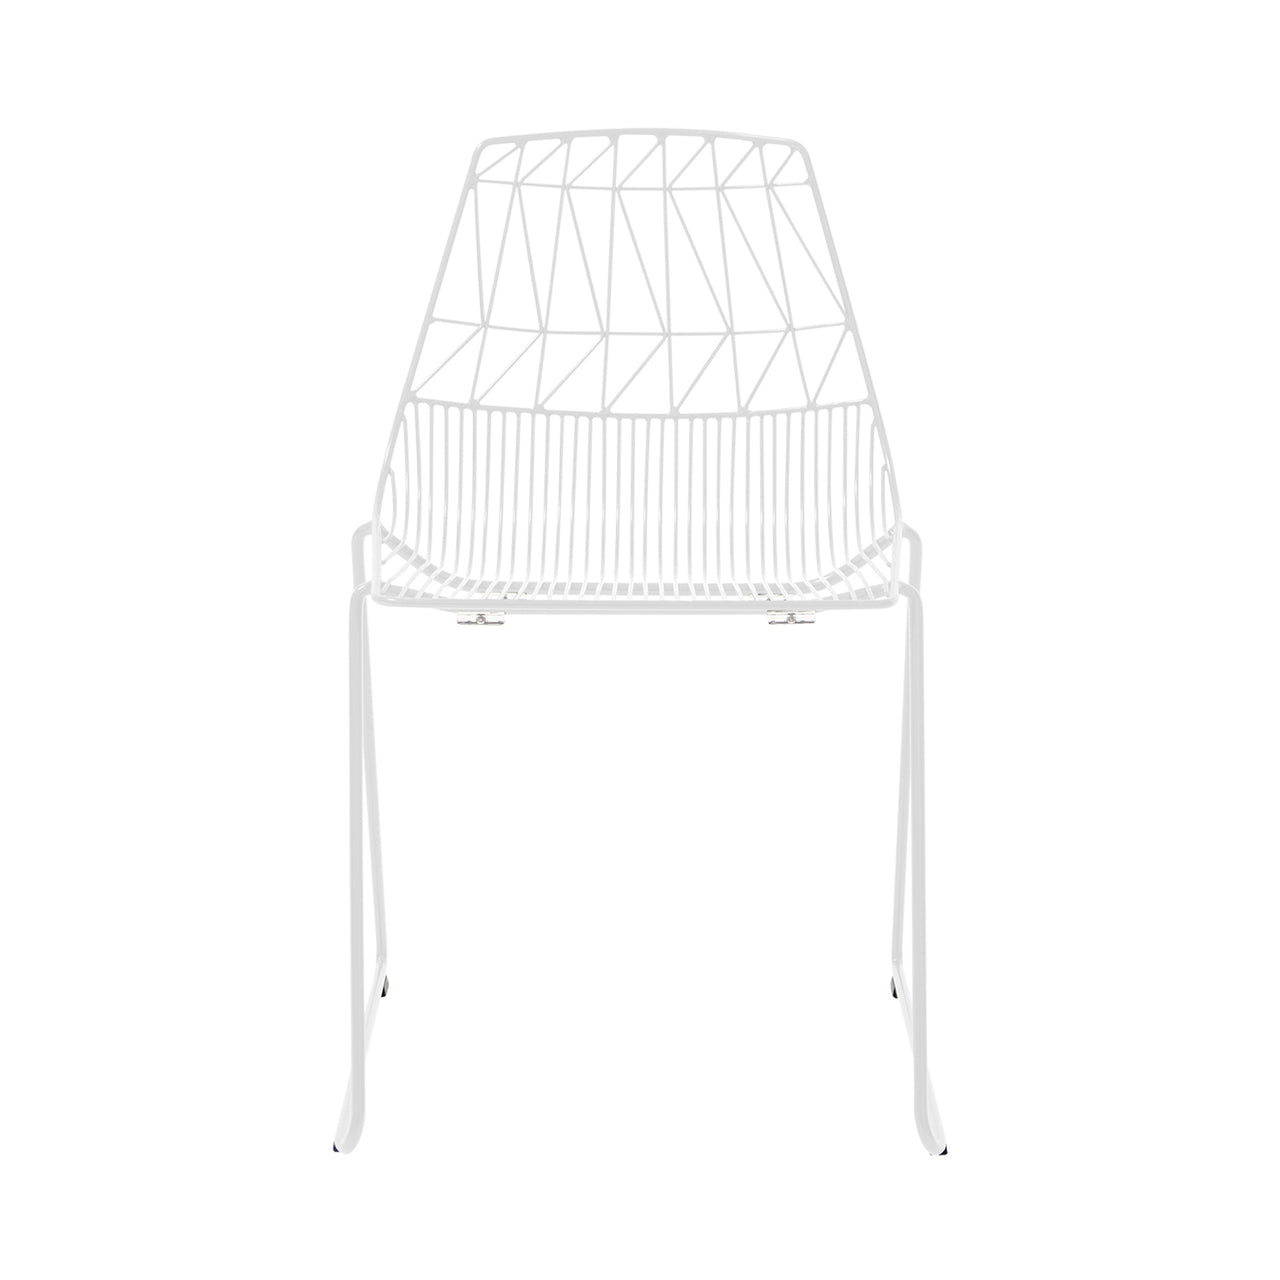 Lucy Stacking Chair: Color + White + Without Seat Pad